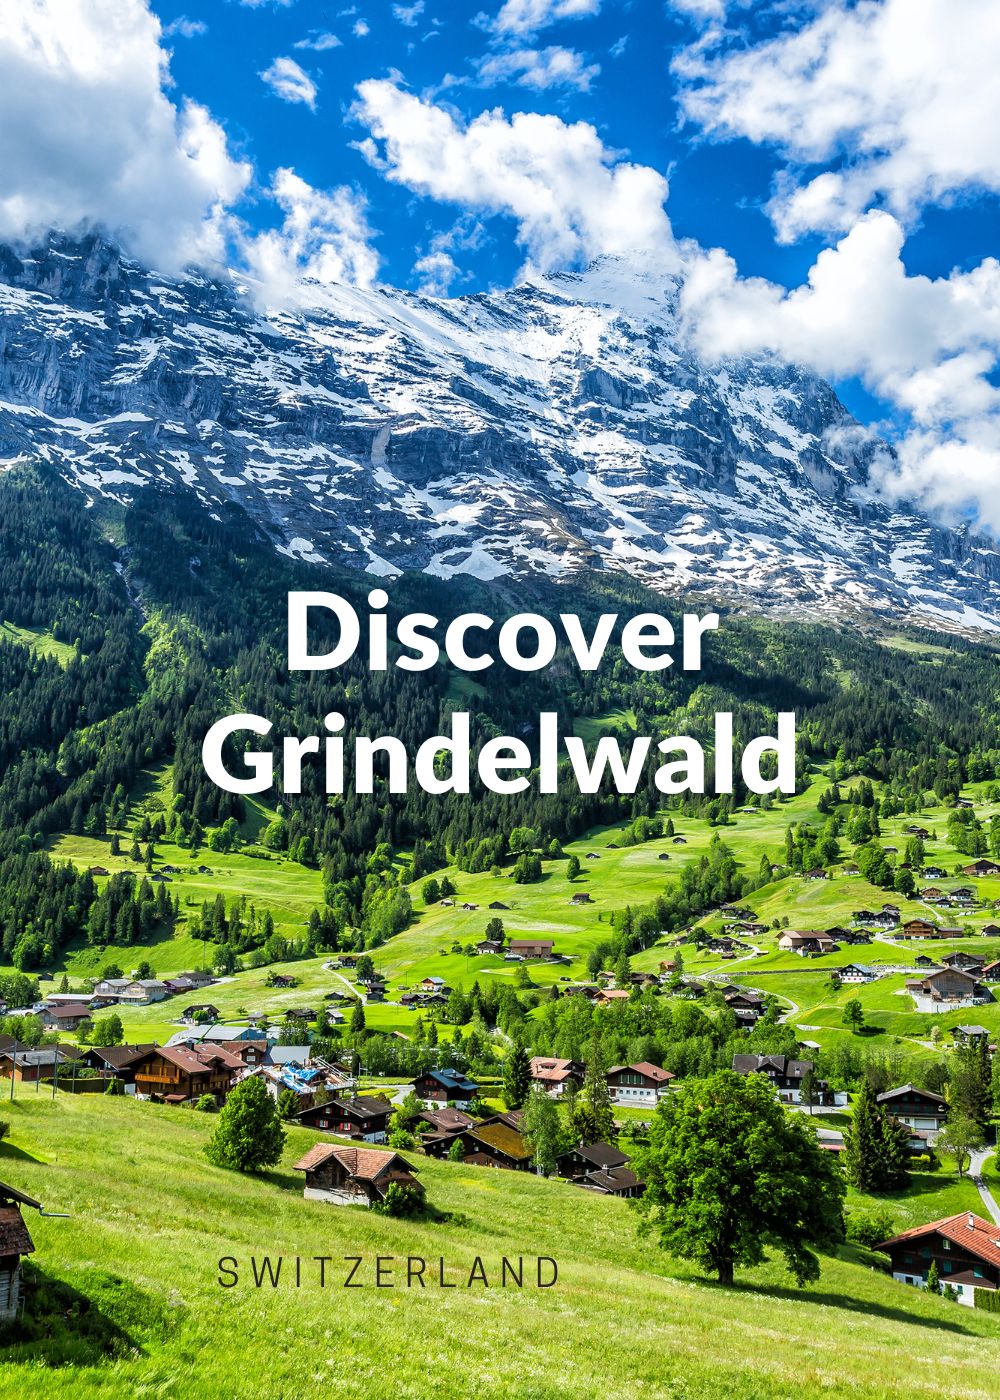 Discover Grindelwald where to stay what to do best things to see and do visit Grindelwald in Switzerland